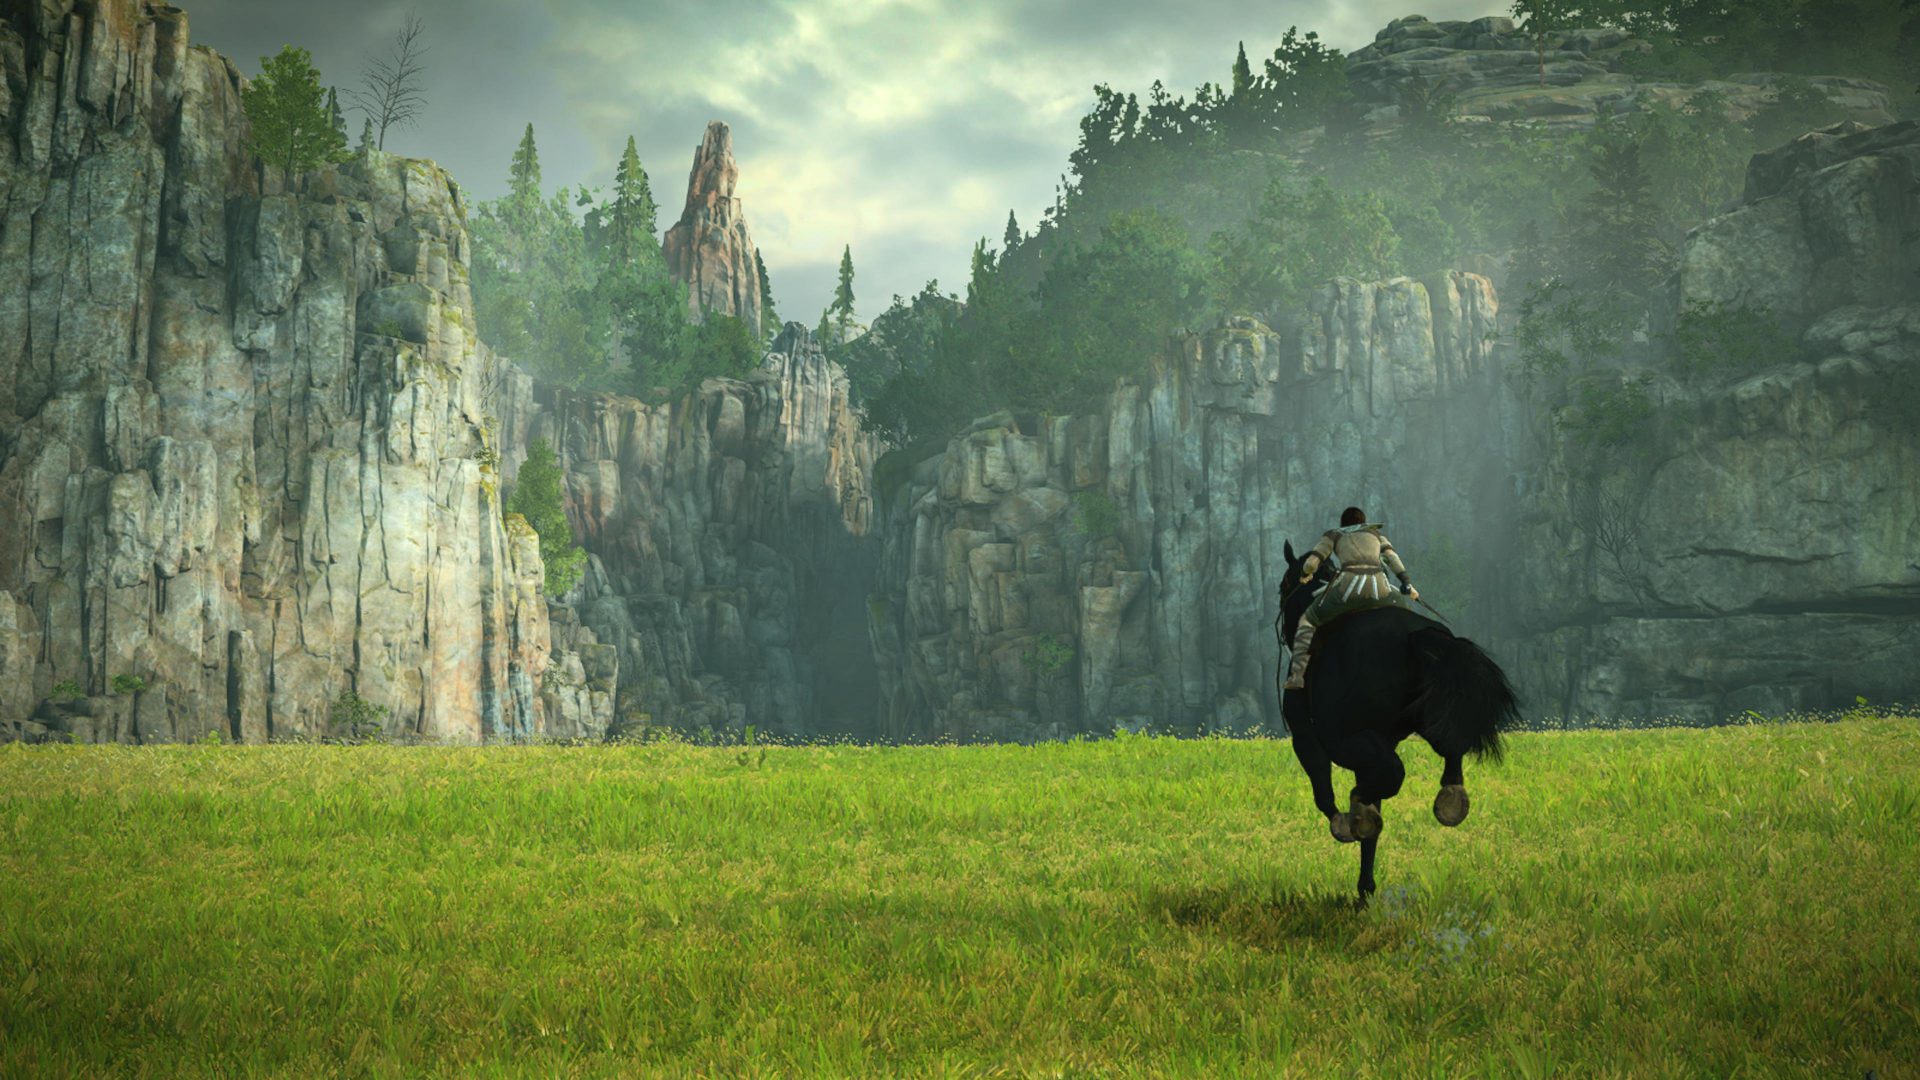 HD desktop wallpaper: Giant, Video Game, Shadow Of The Colossus